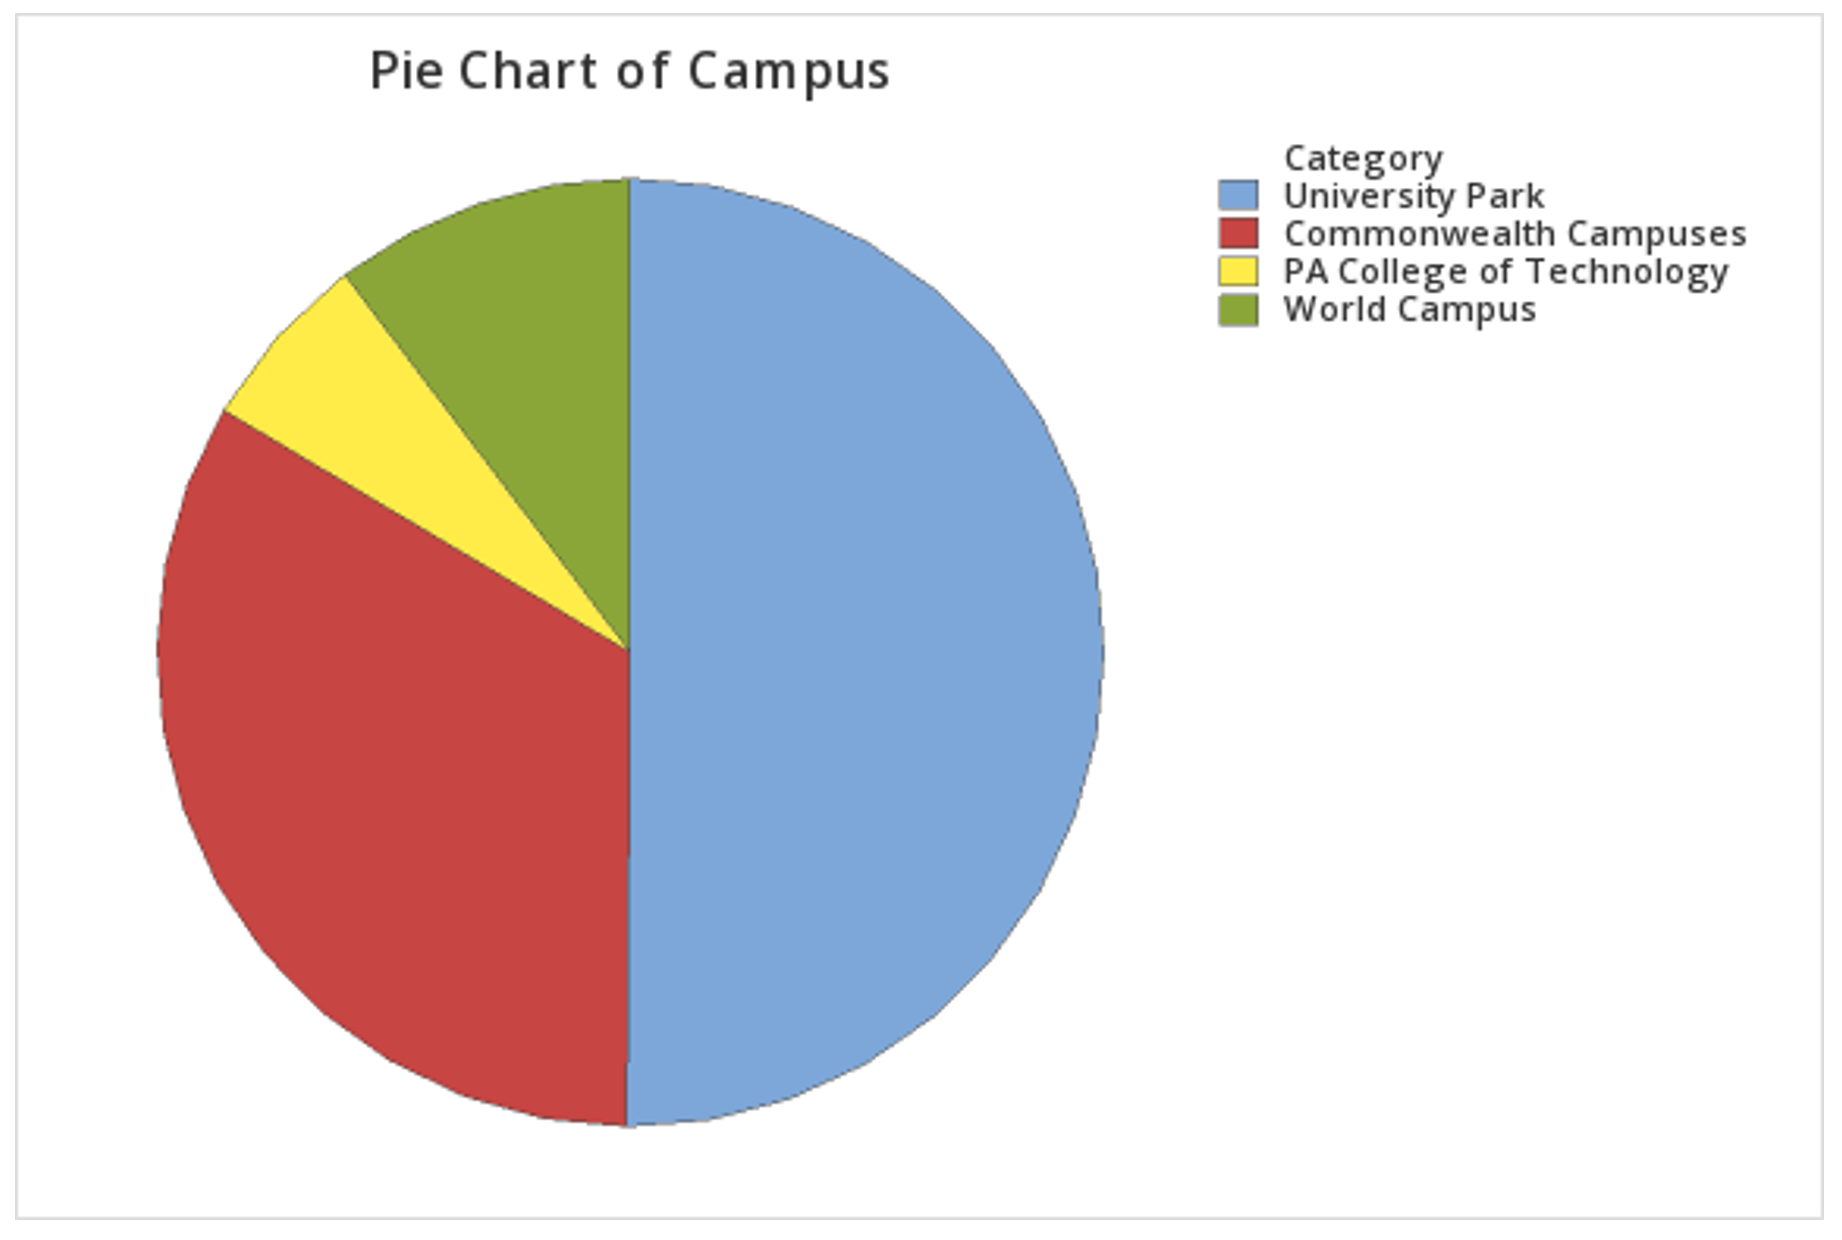 Pie chart of primary campus made in Minitab using summarized data in a table